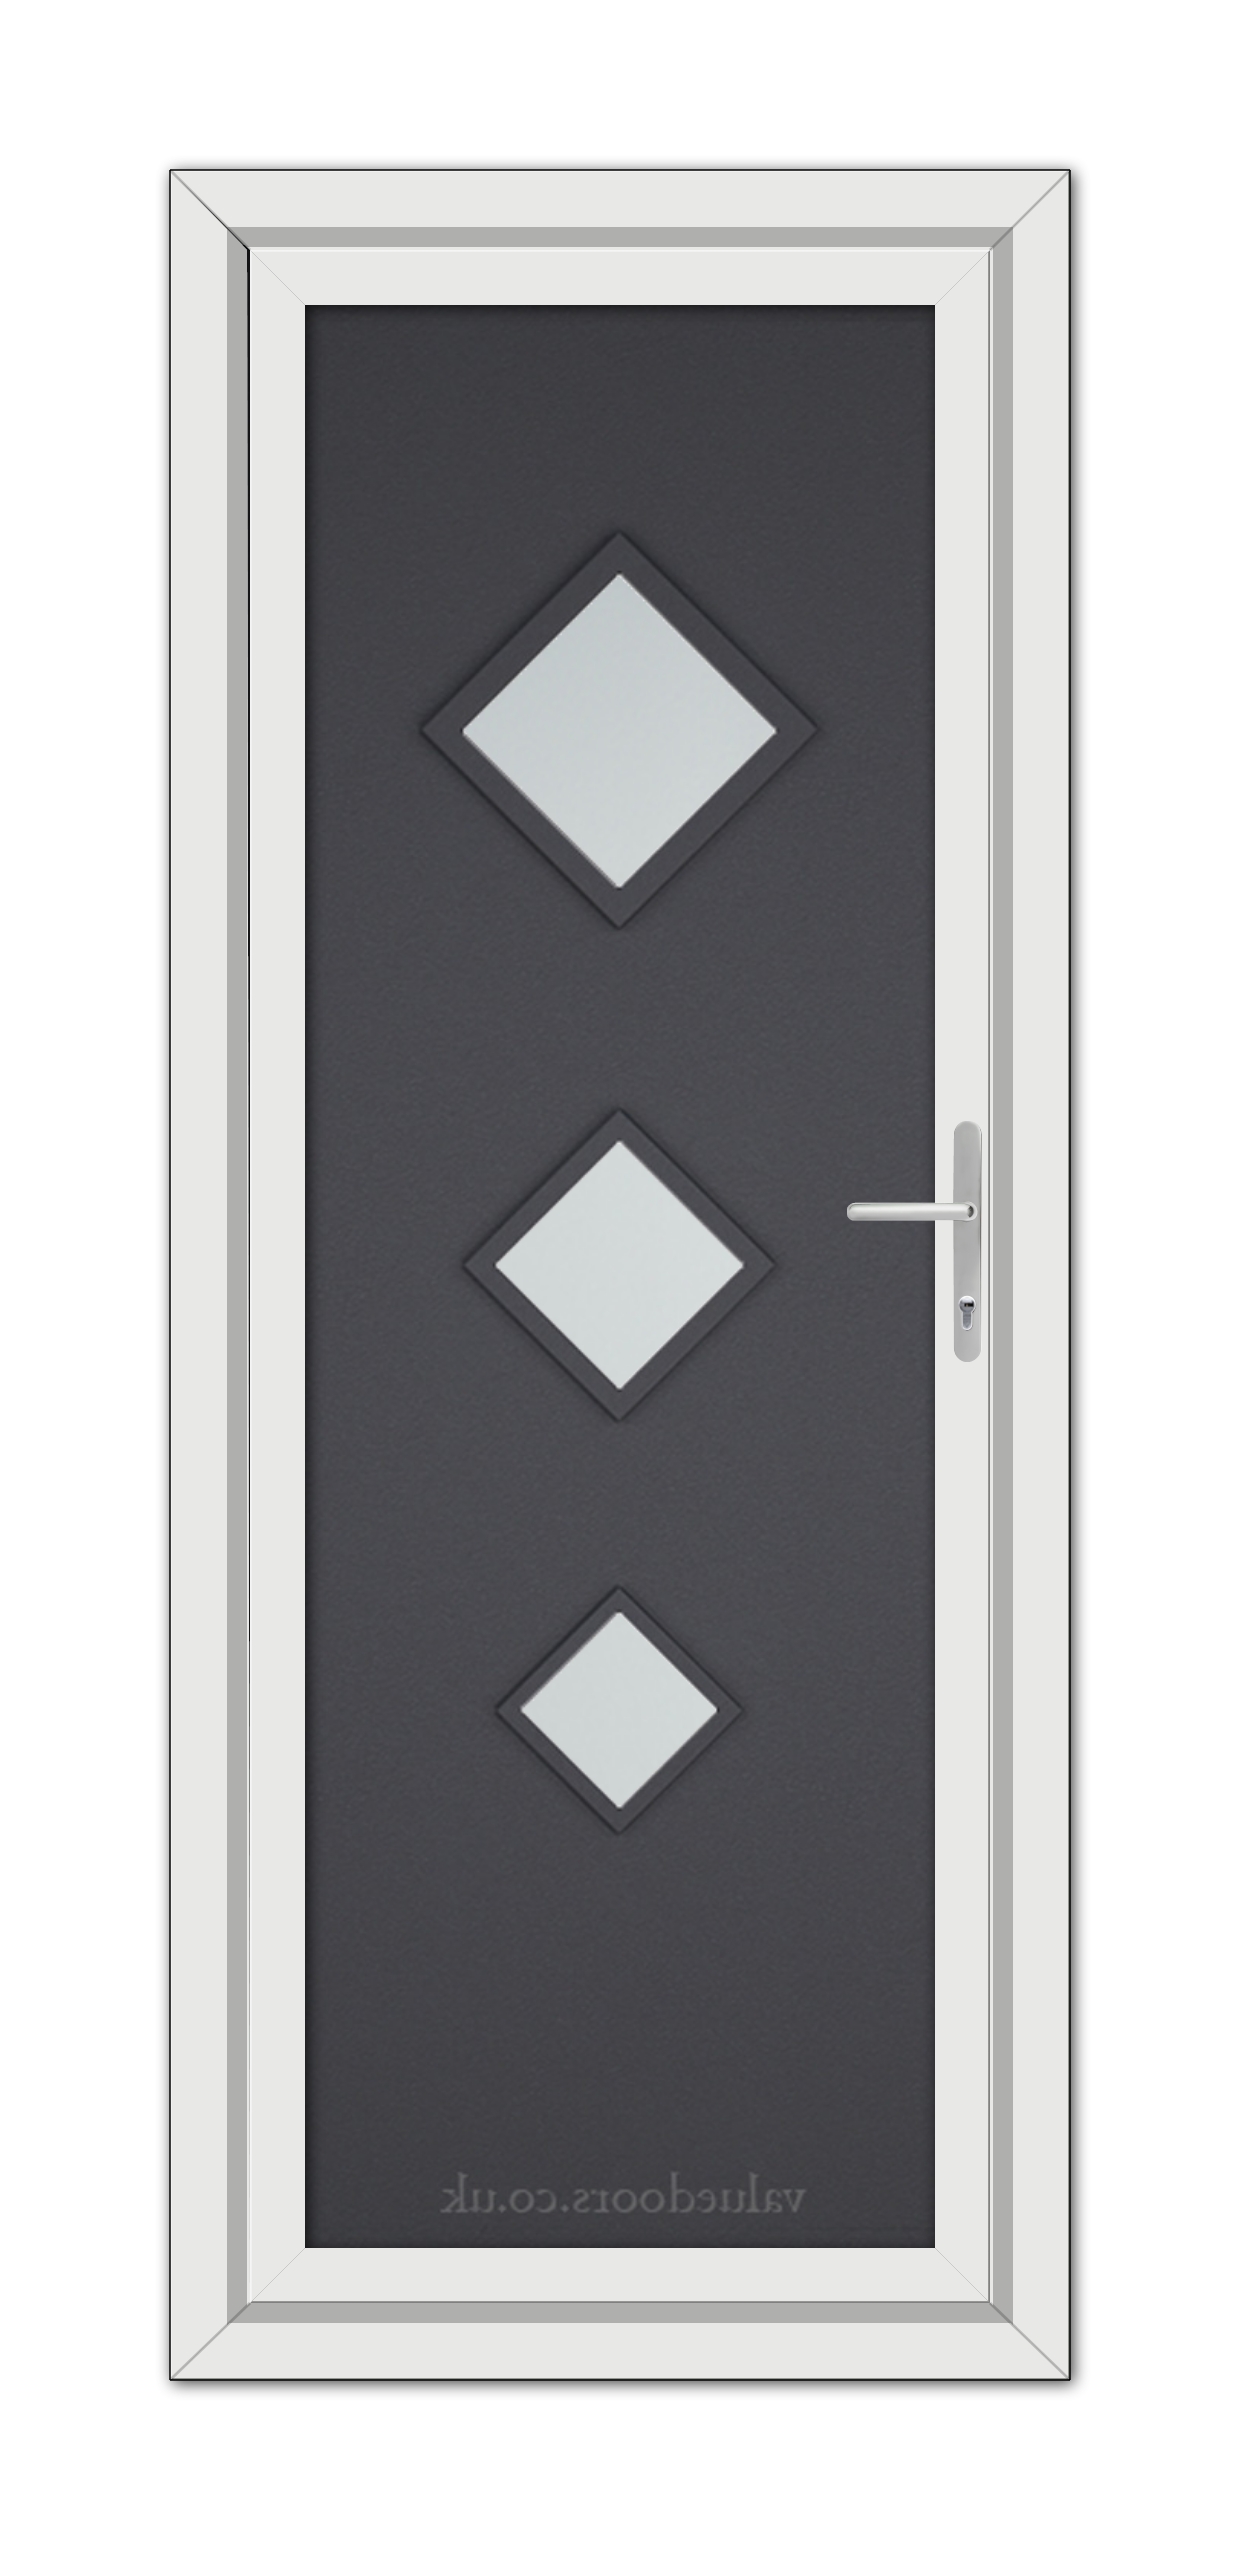 A modern Grey Grained Modern 5123 uPVC door with a dark gray panel featuring three diamond-shaped windows and a silver handle on the right.